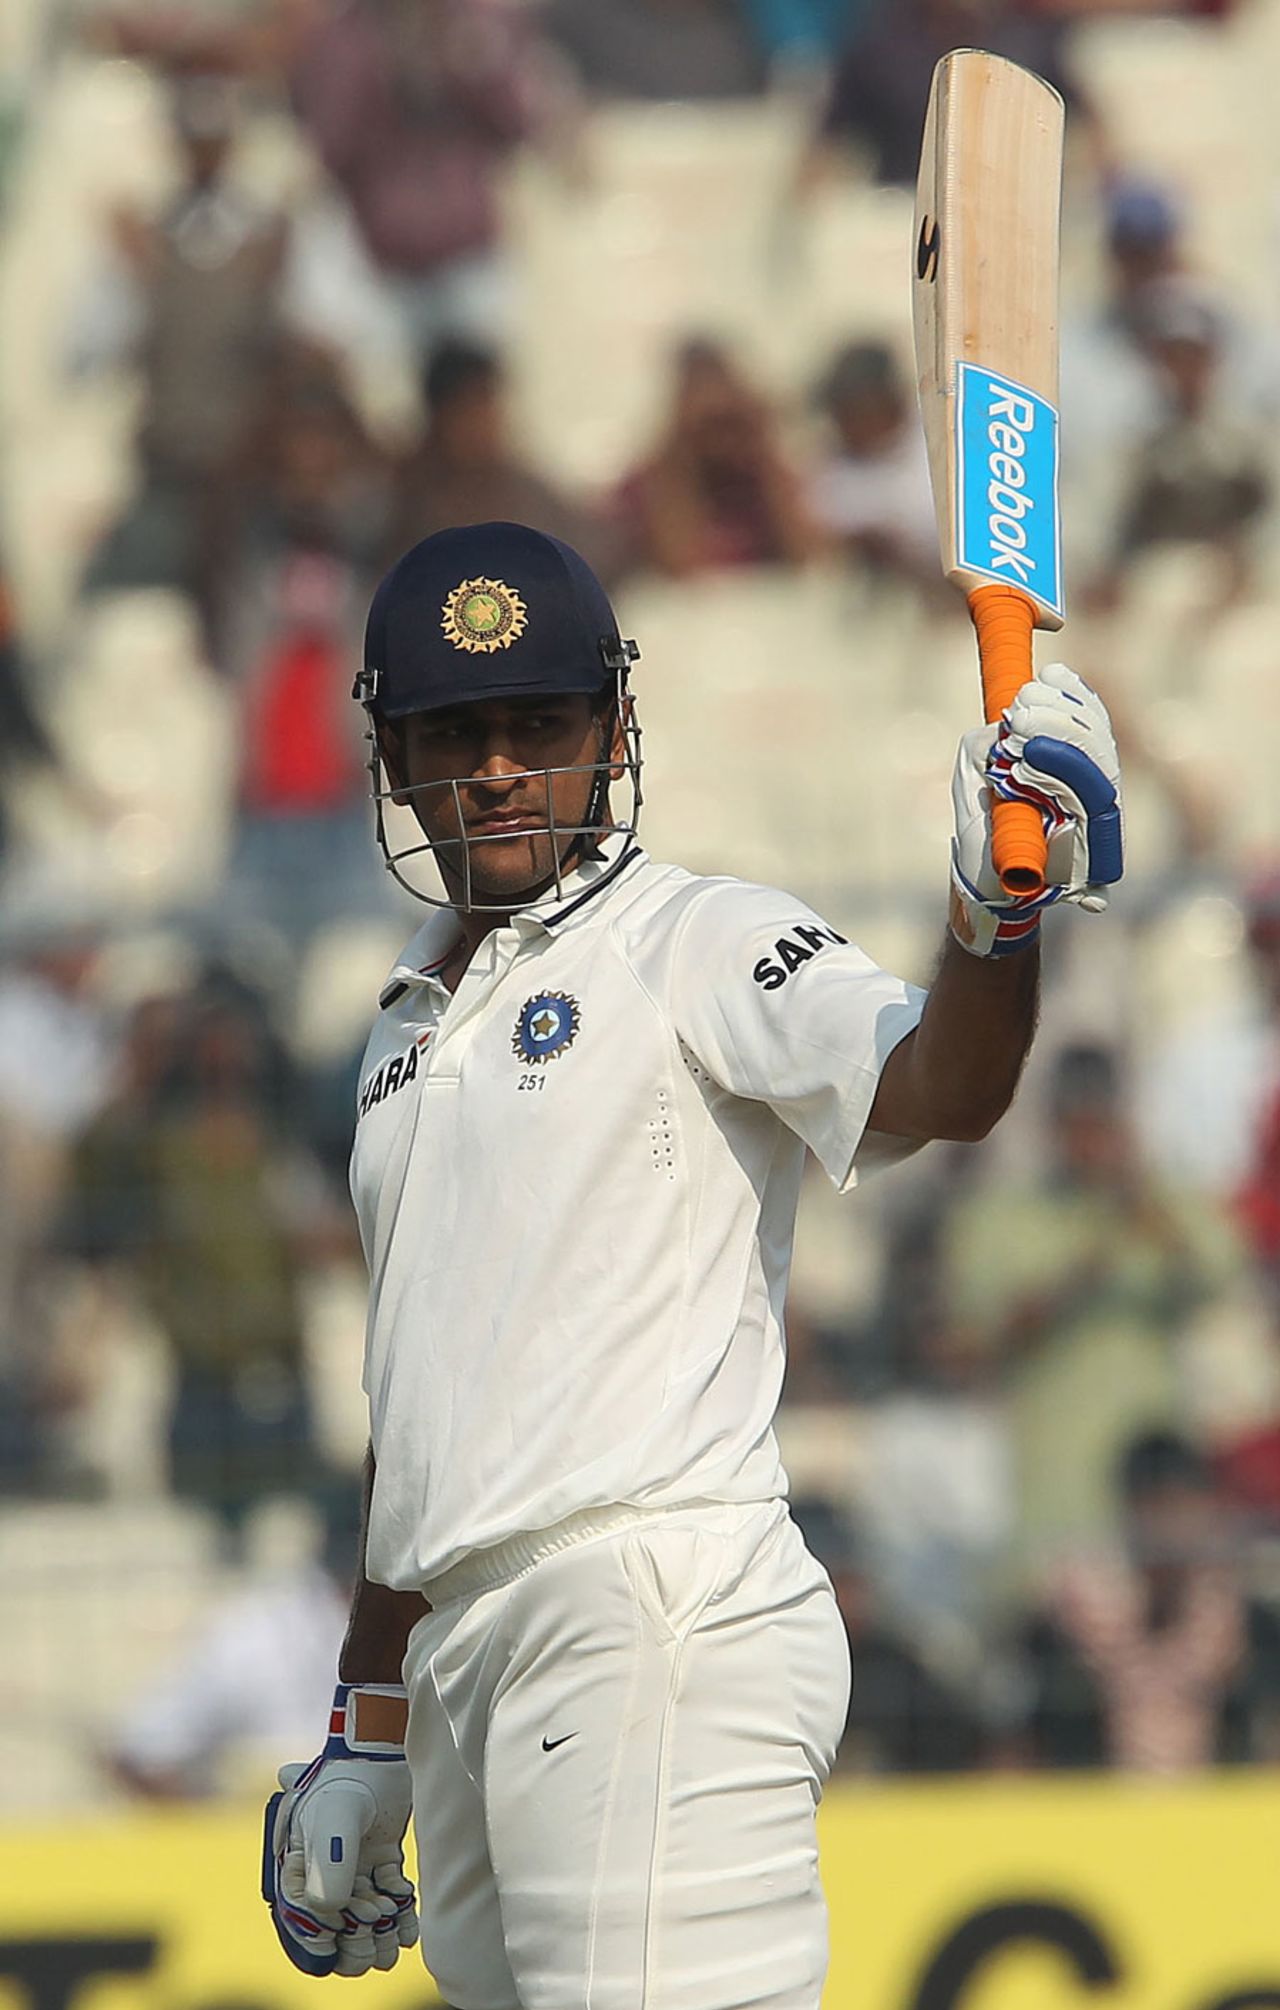 MS Dhoni scored a half-century batting with the tail, India v England, 3rd Test, Kolkata, 2nd day, December 6, 2012